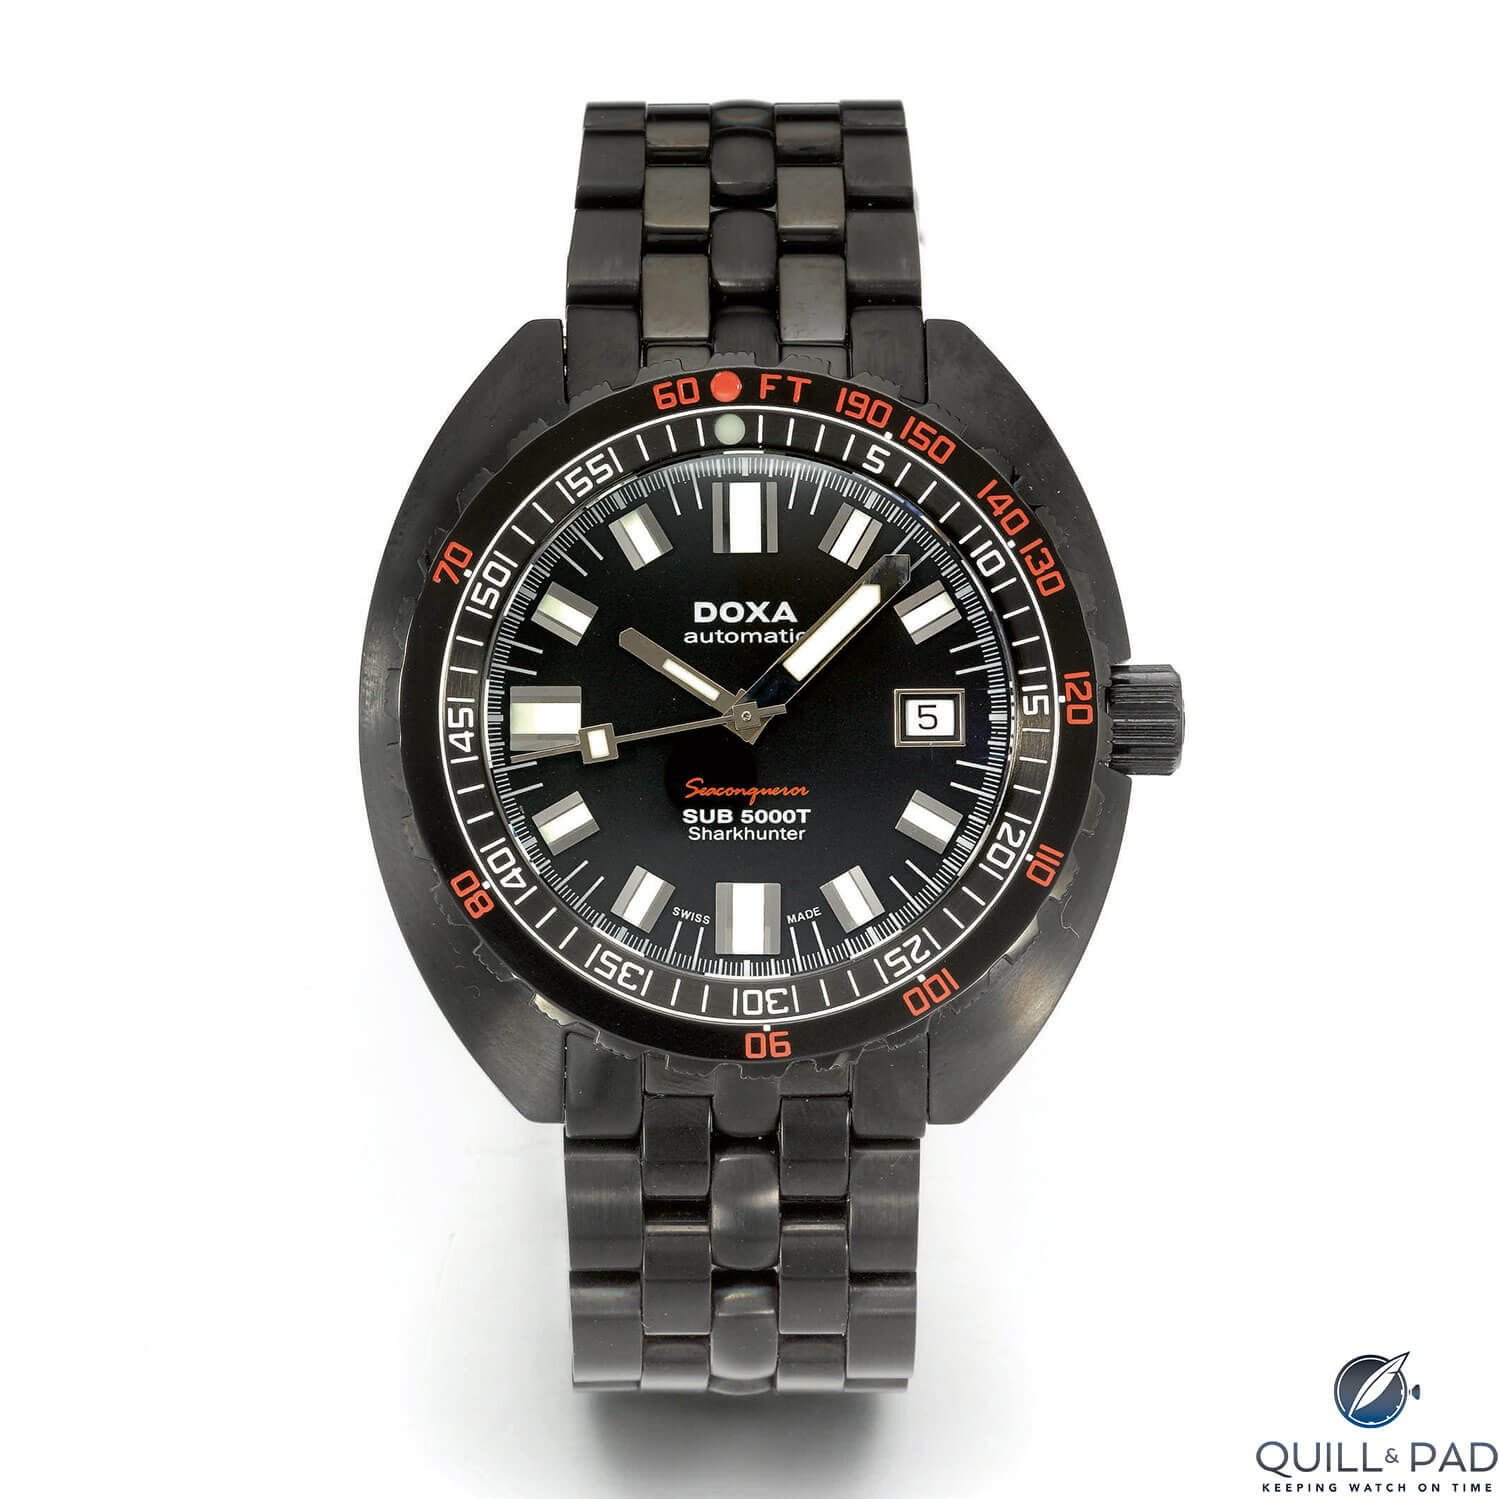 Doxa Seaconqueror Sharkhunter owned by Robin Williams in Sothebys' auction October 2018